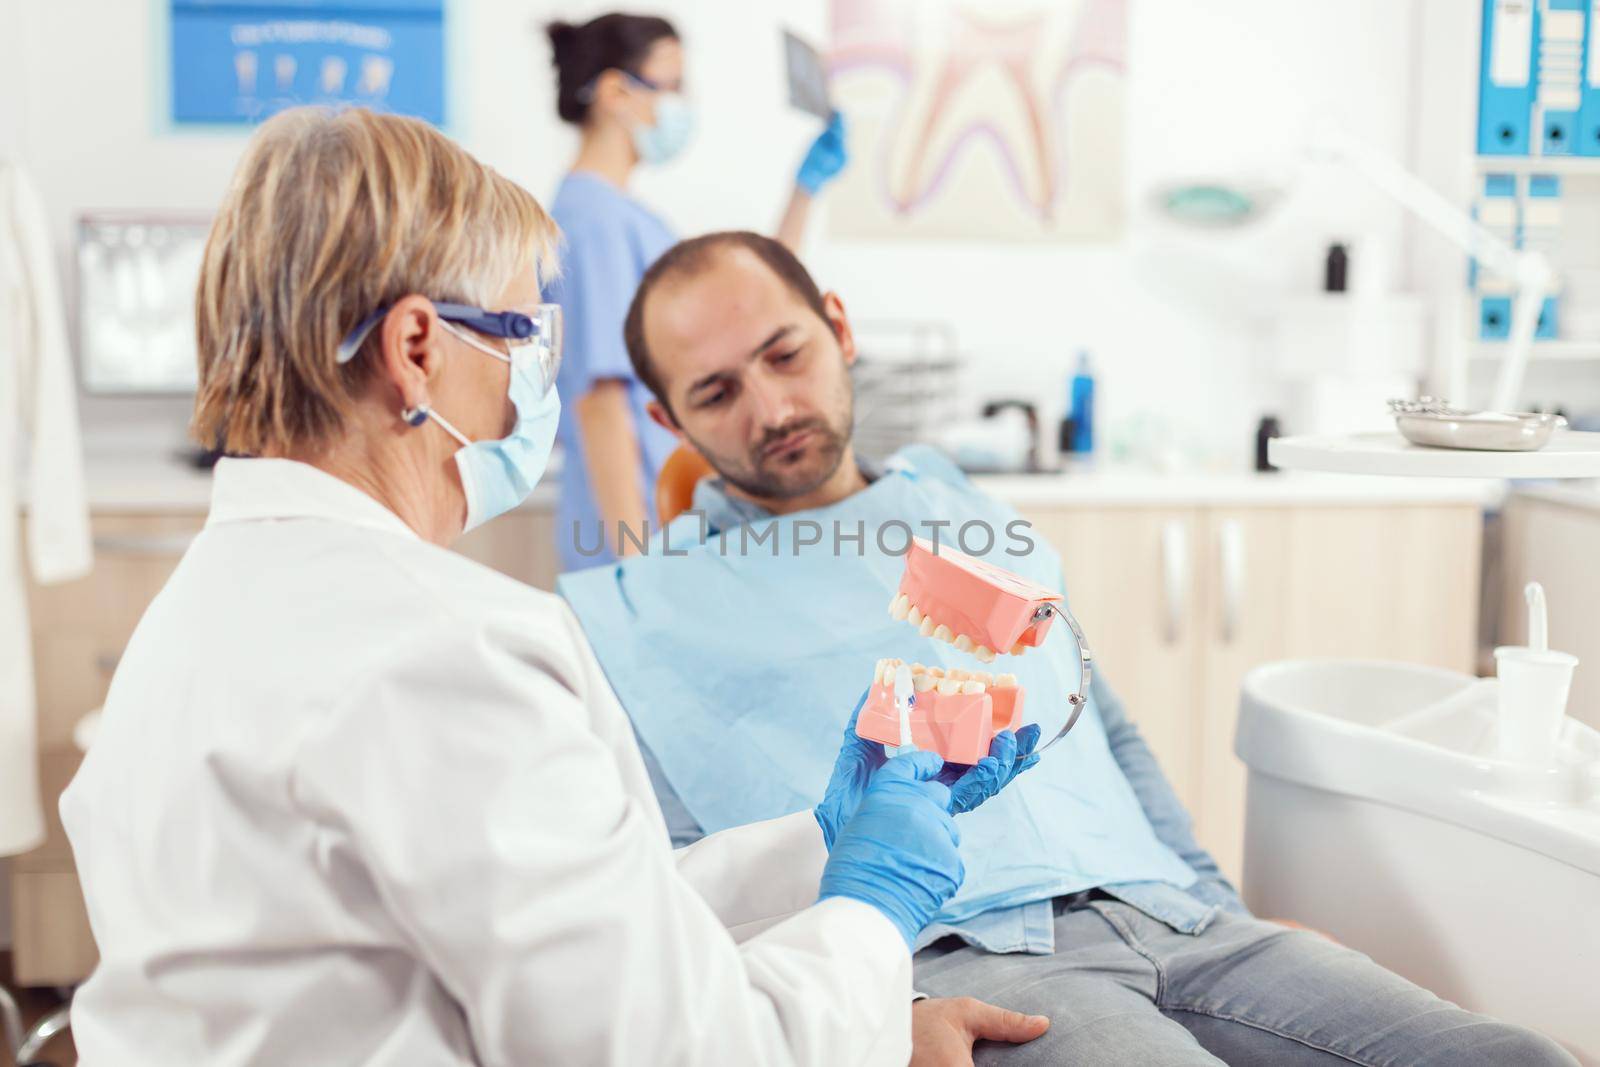 Senior dentist woman holding the dental jaw skeleton explaining dental surgery to patient. Stomatologist demonstrating professional brushing of teeth with a toothbrush during stomatology consultation